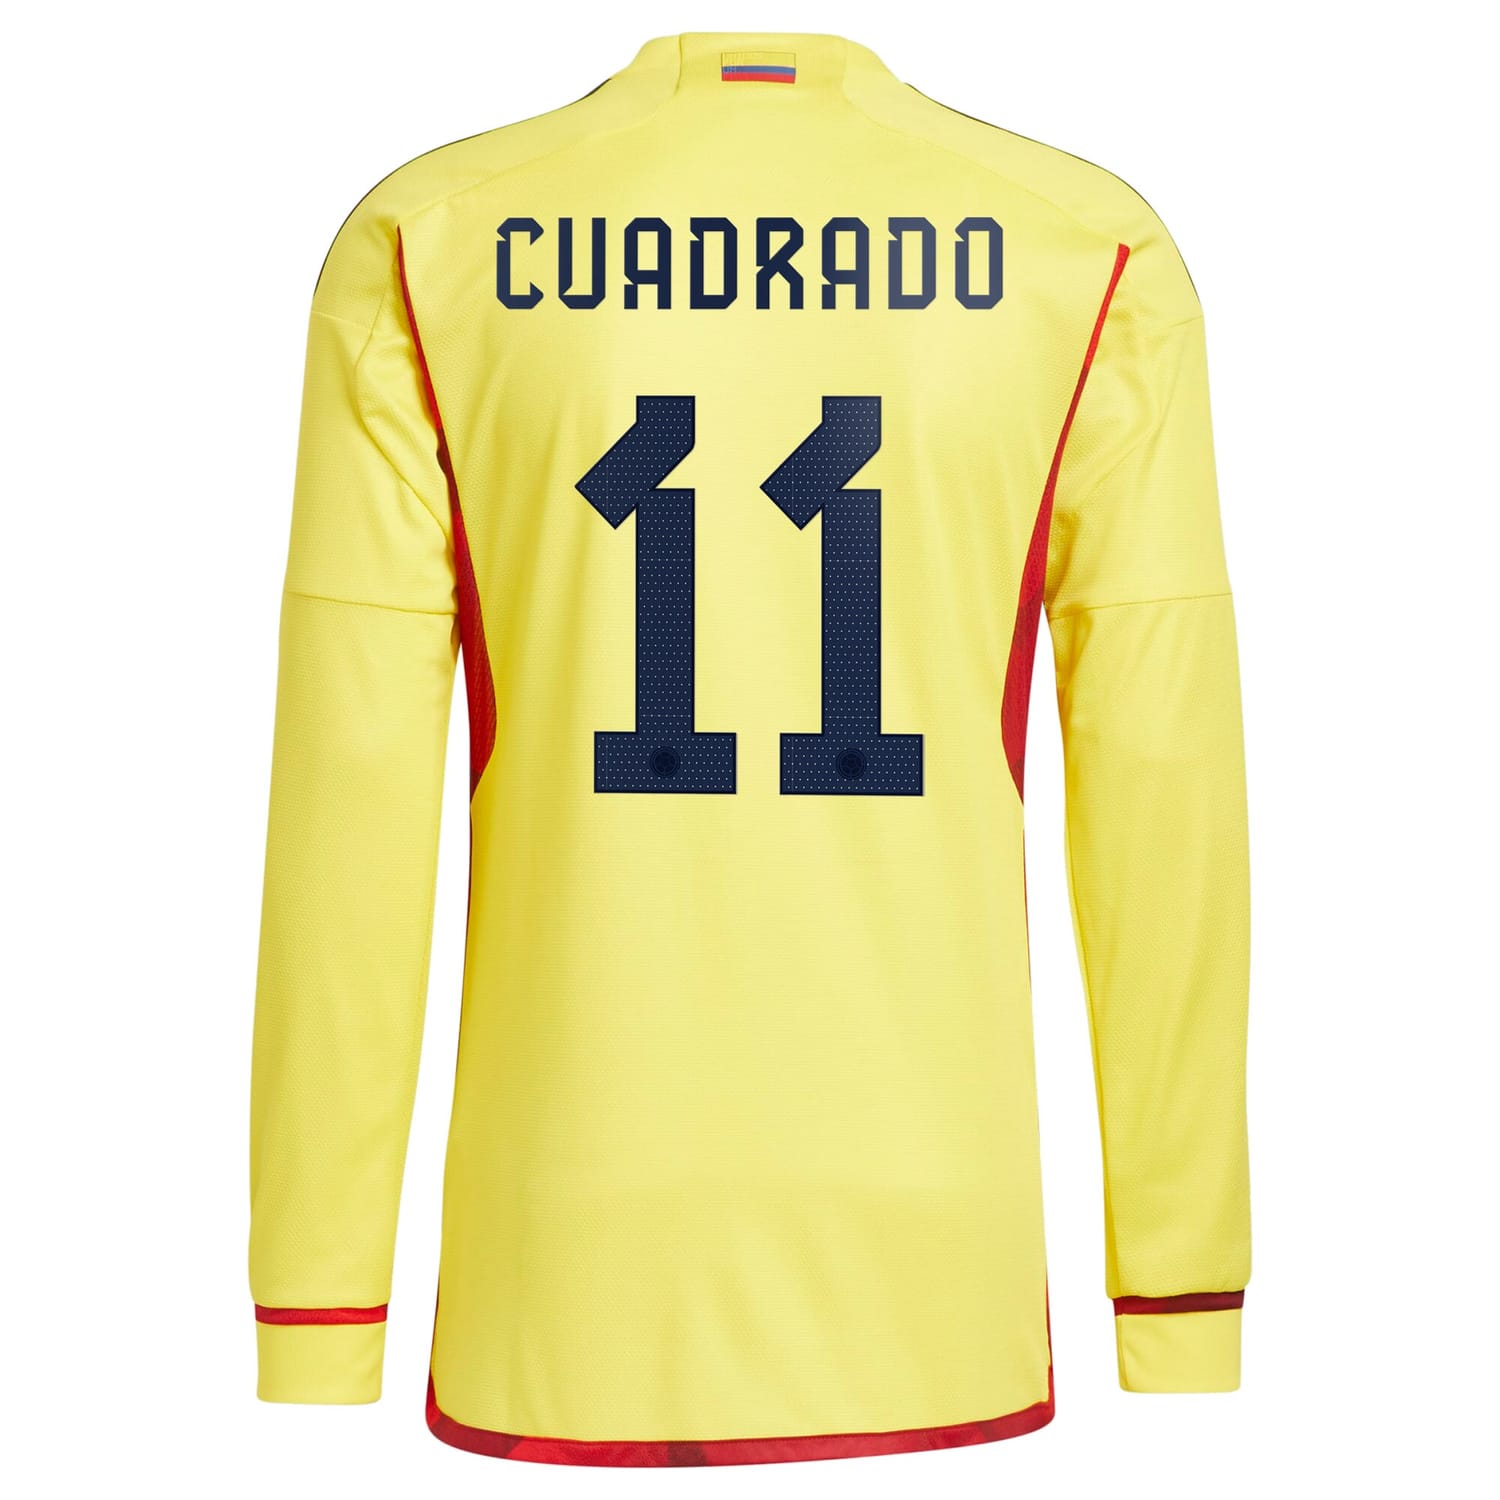 Colombia National Team Home Jersey Shirt Long Sleeve Yellow 2022-23 player Juan Cuadrado printing for Men